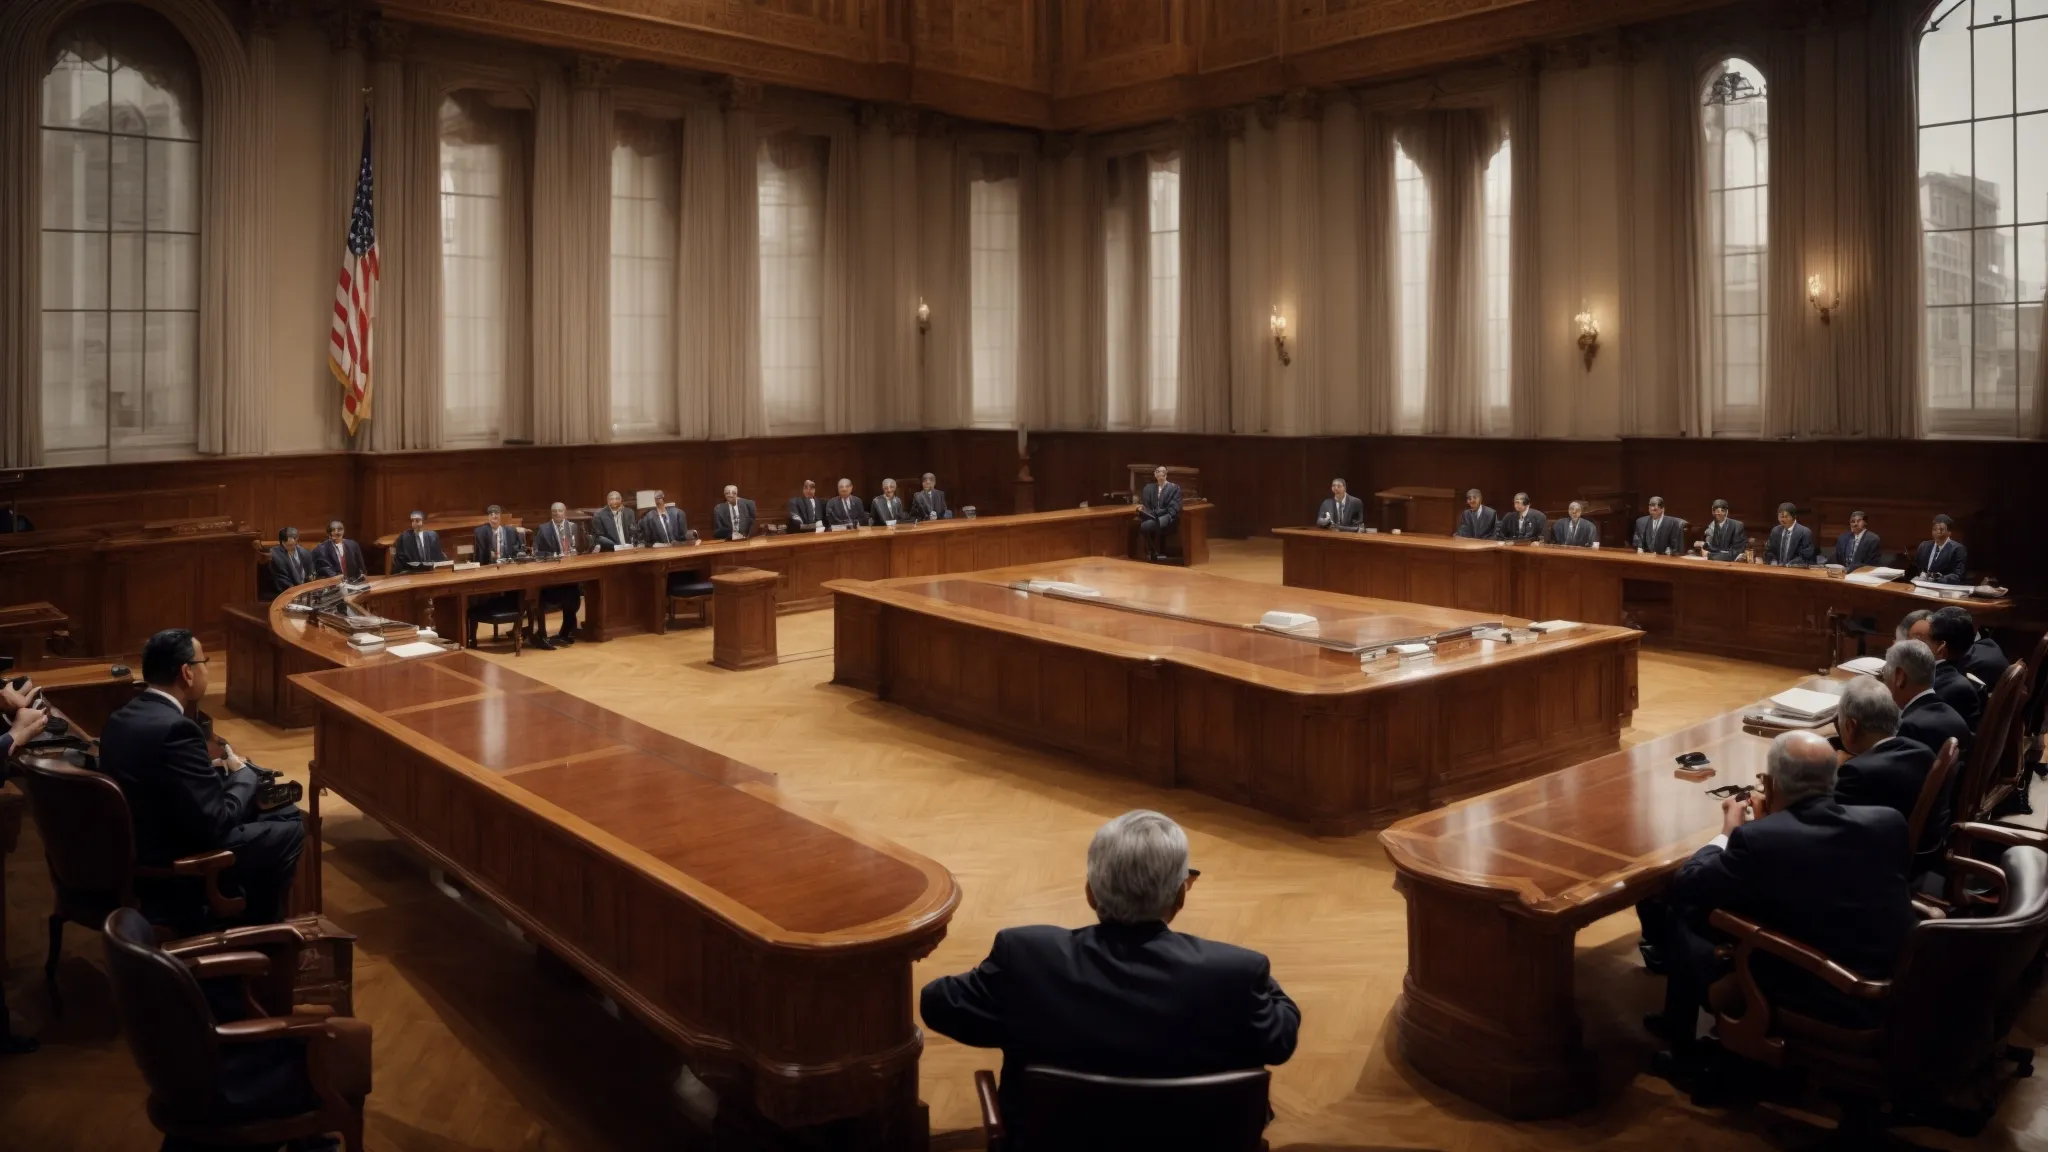 a grand courtroom with a diverse panel of judges and a large world map depicting global jurisdictions.